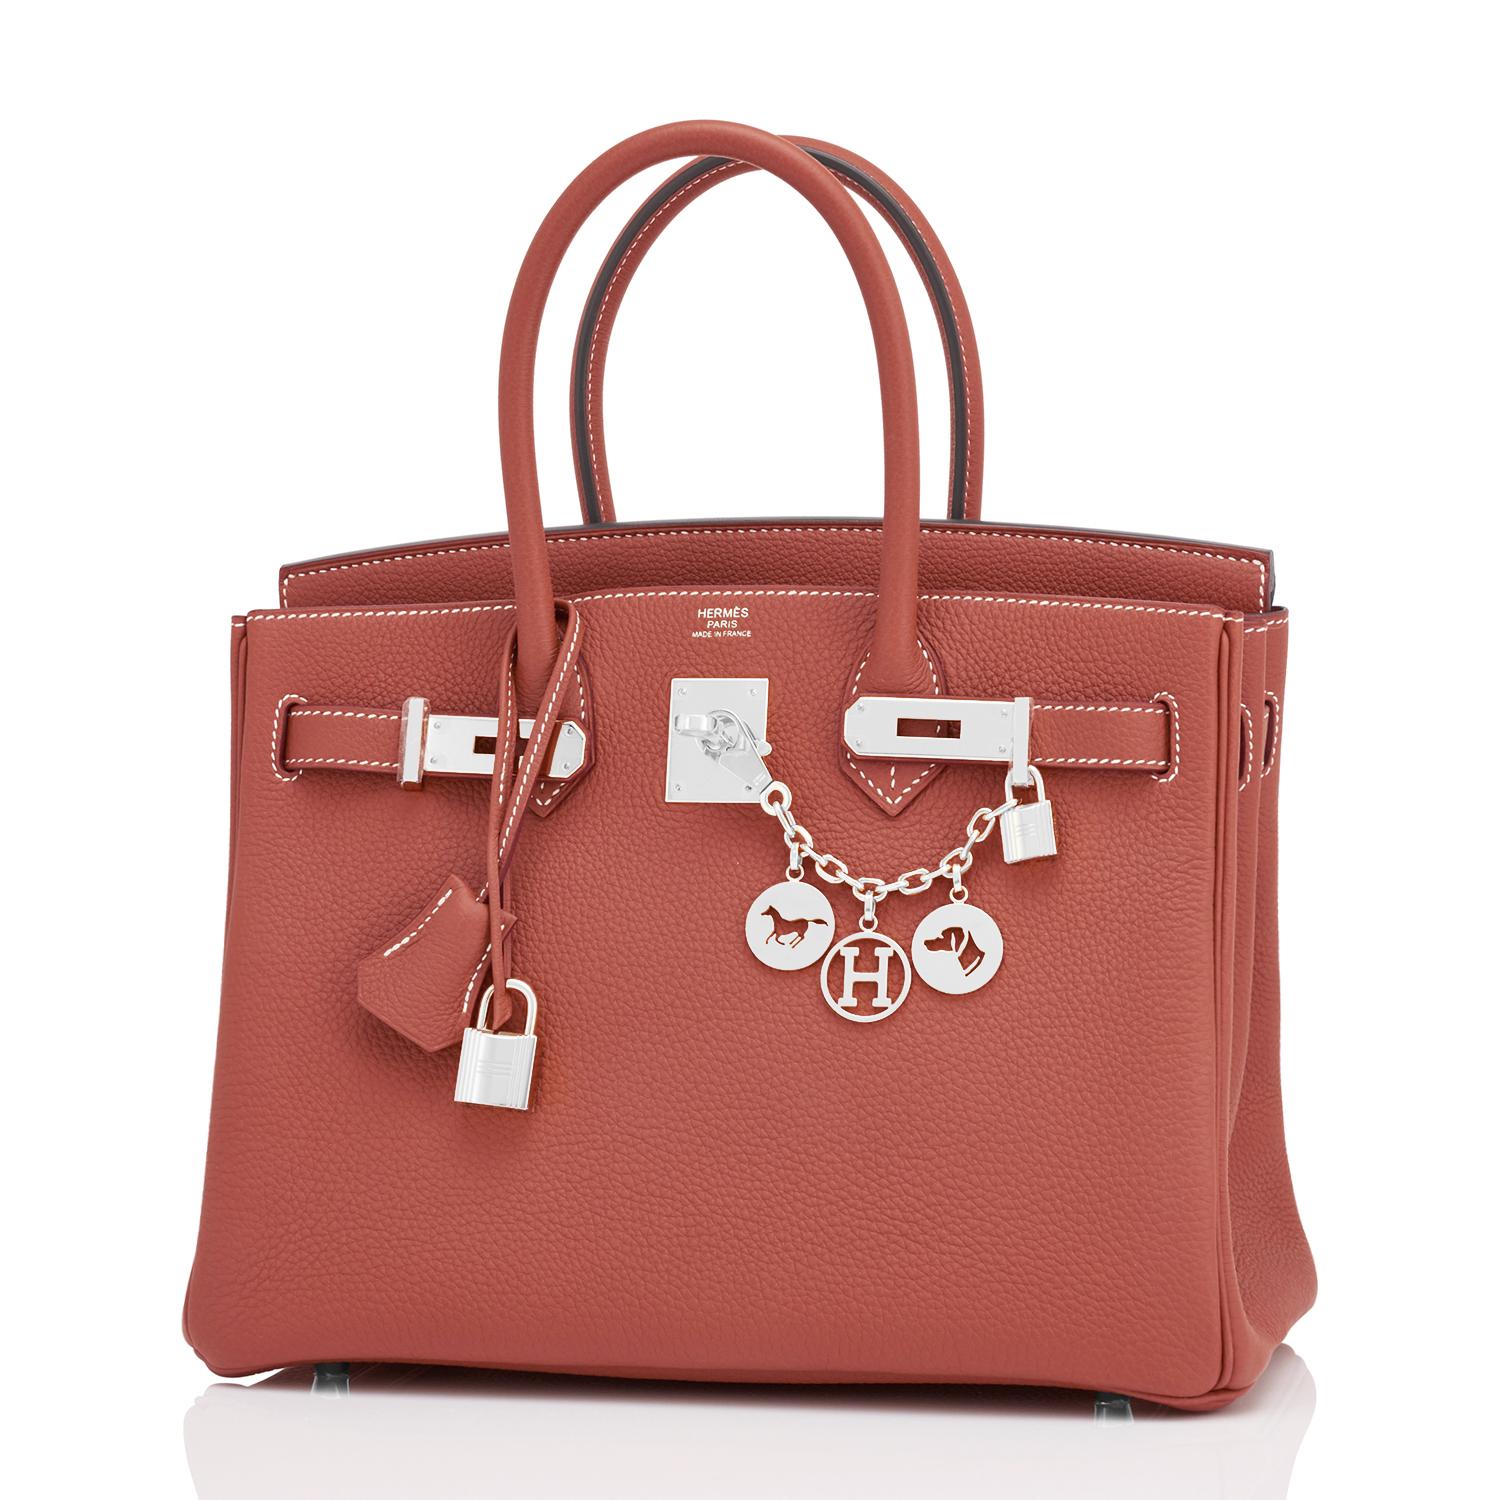 BANK WIRE PRICE ONLY!
Order will be cancelled if not paid by wire.
Chicjoy is pleased to present this gorgeous Hermes Birkin 30 in Sienne Togo
Don't miss this rare Birkin in Sienne, the new gorgeous and rich cognac color from Hermes.
Just purchased